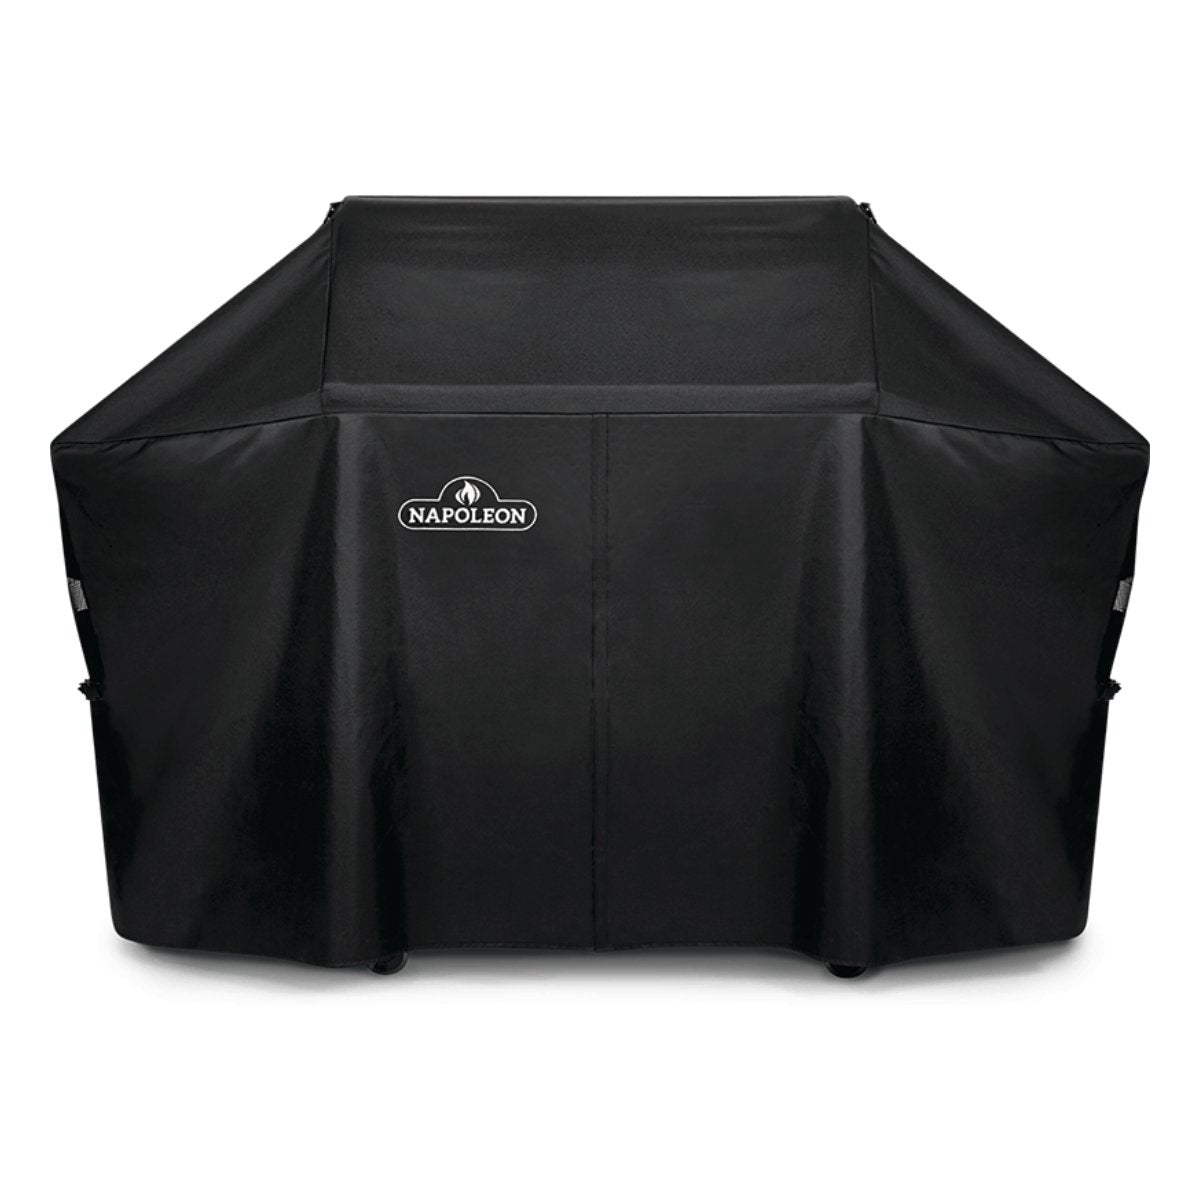 Cover For Napoleon Pro 665 Grill With Cart - Kitchen In The Garden